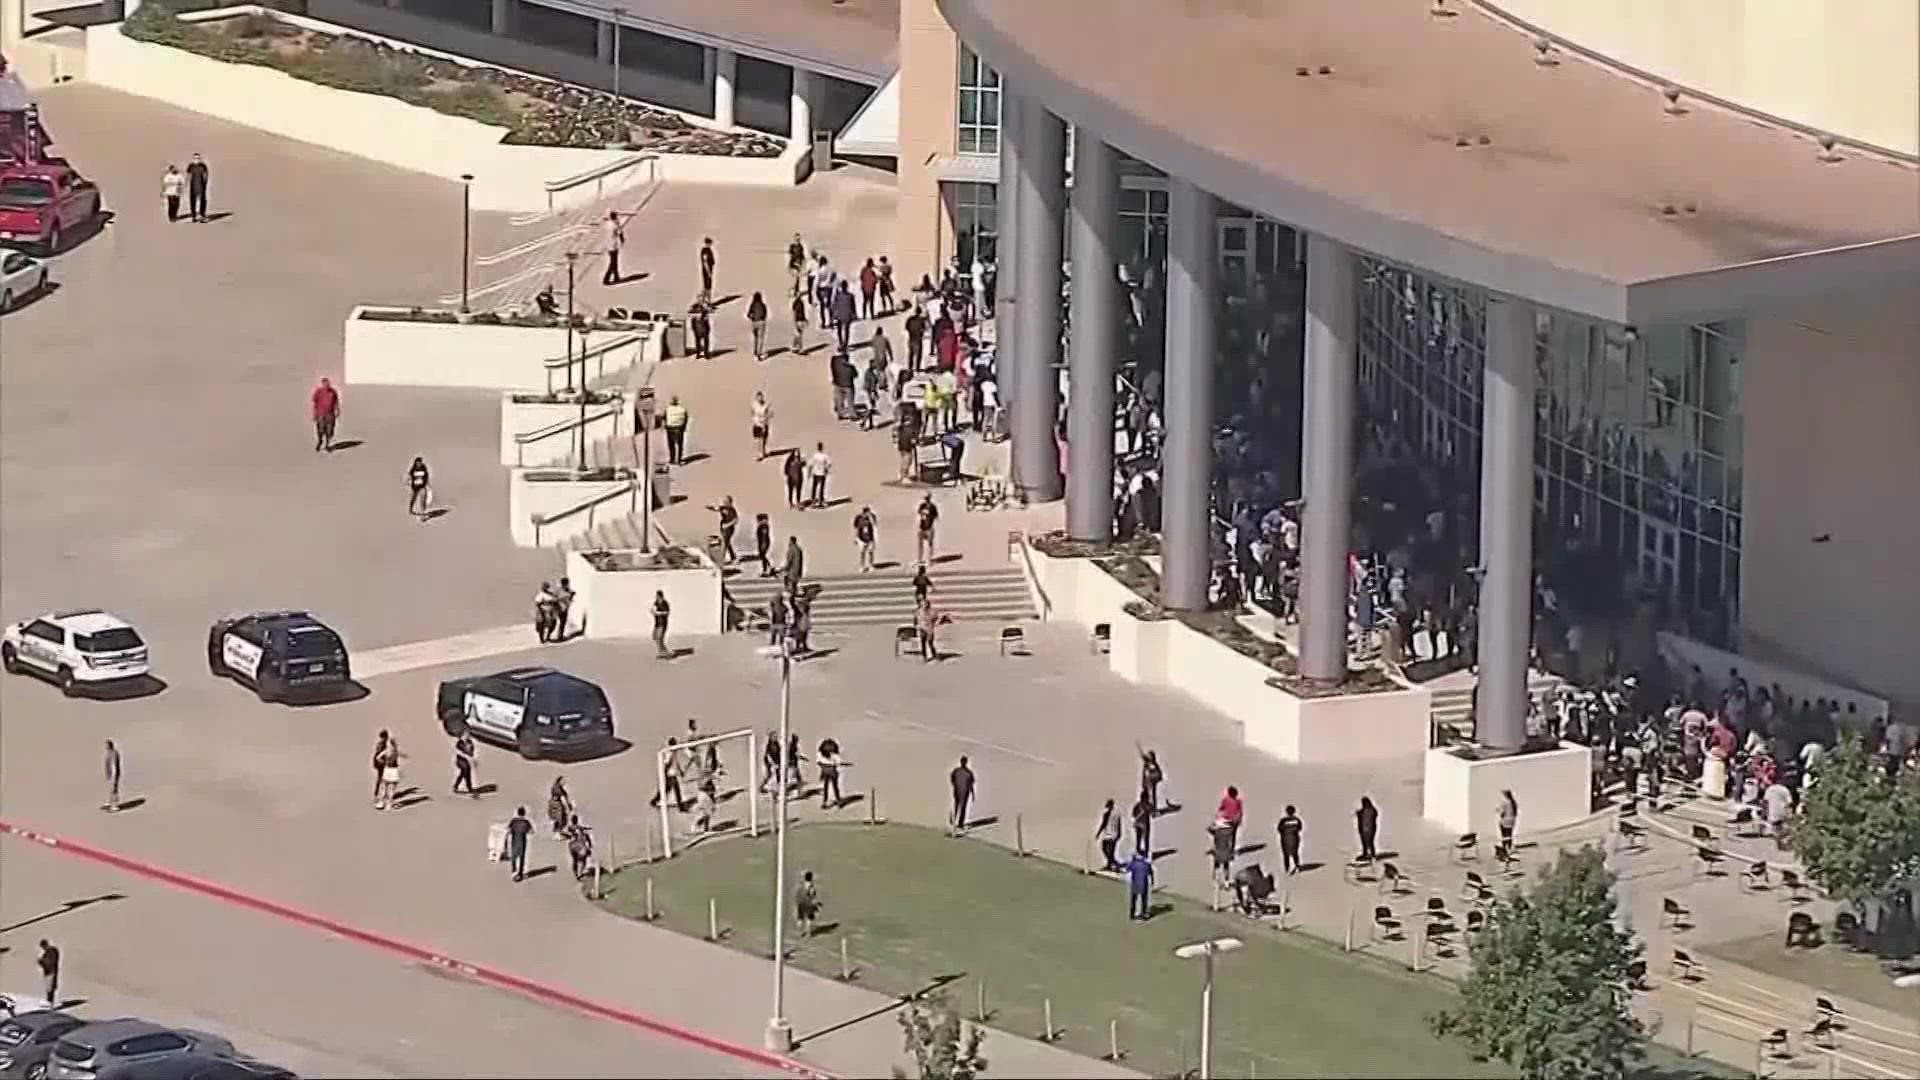 Police say a student pulled a gun during a fight on campus. Governor Greg Abbott and a rep. from the Texas State Teachers Association shared their thoughts.